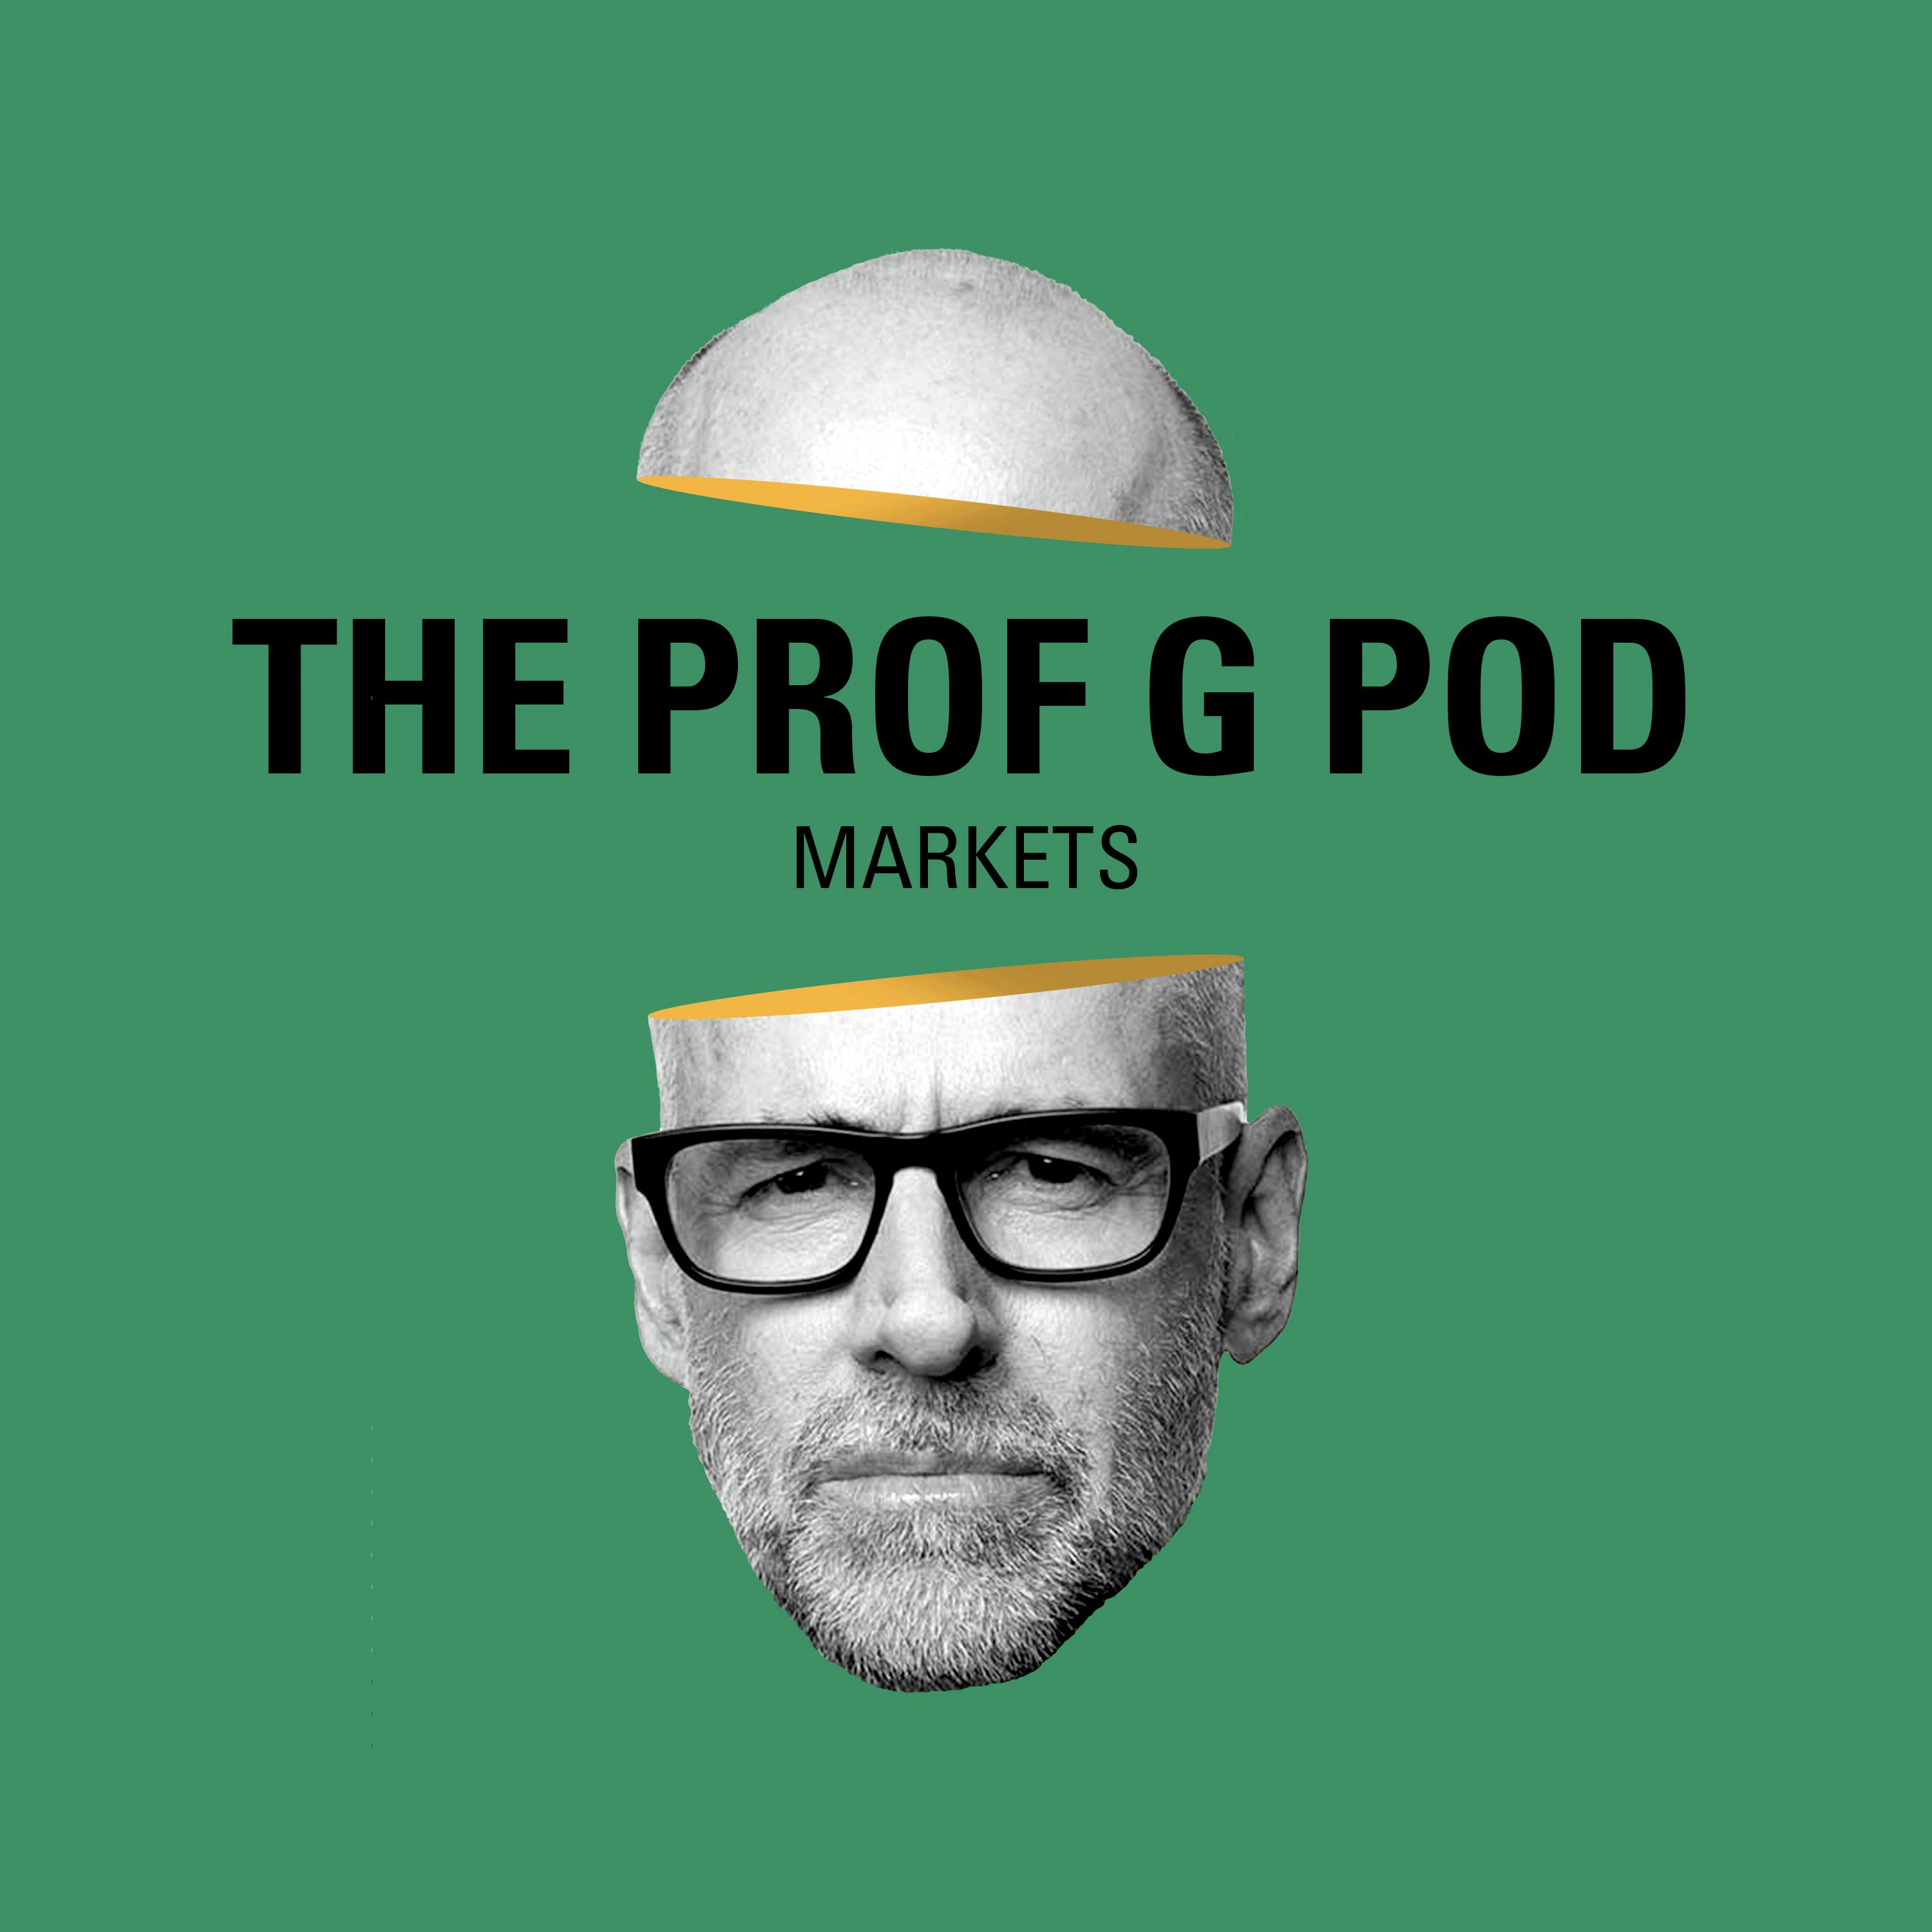 Prof G Markets: Target and Walmart Earnings, Hedge Funds and Pinterest, and Estée Lauder Buys Tom Ford by Vox Media Podcast Network